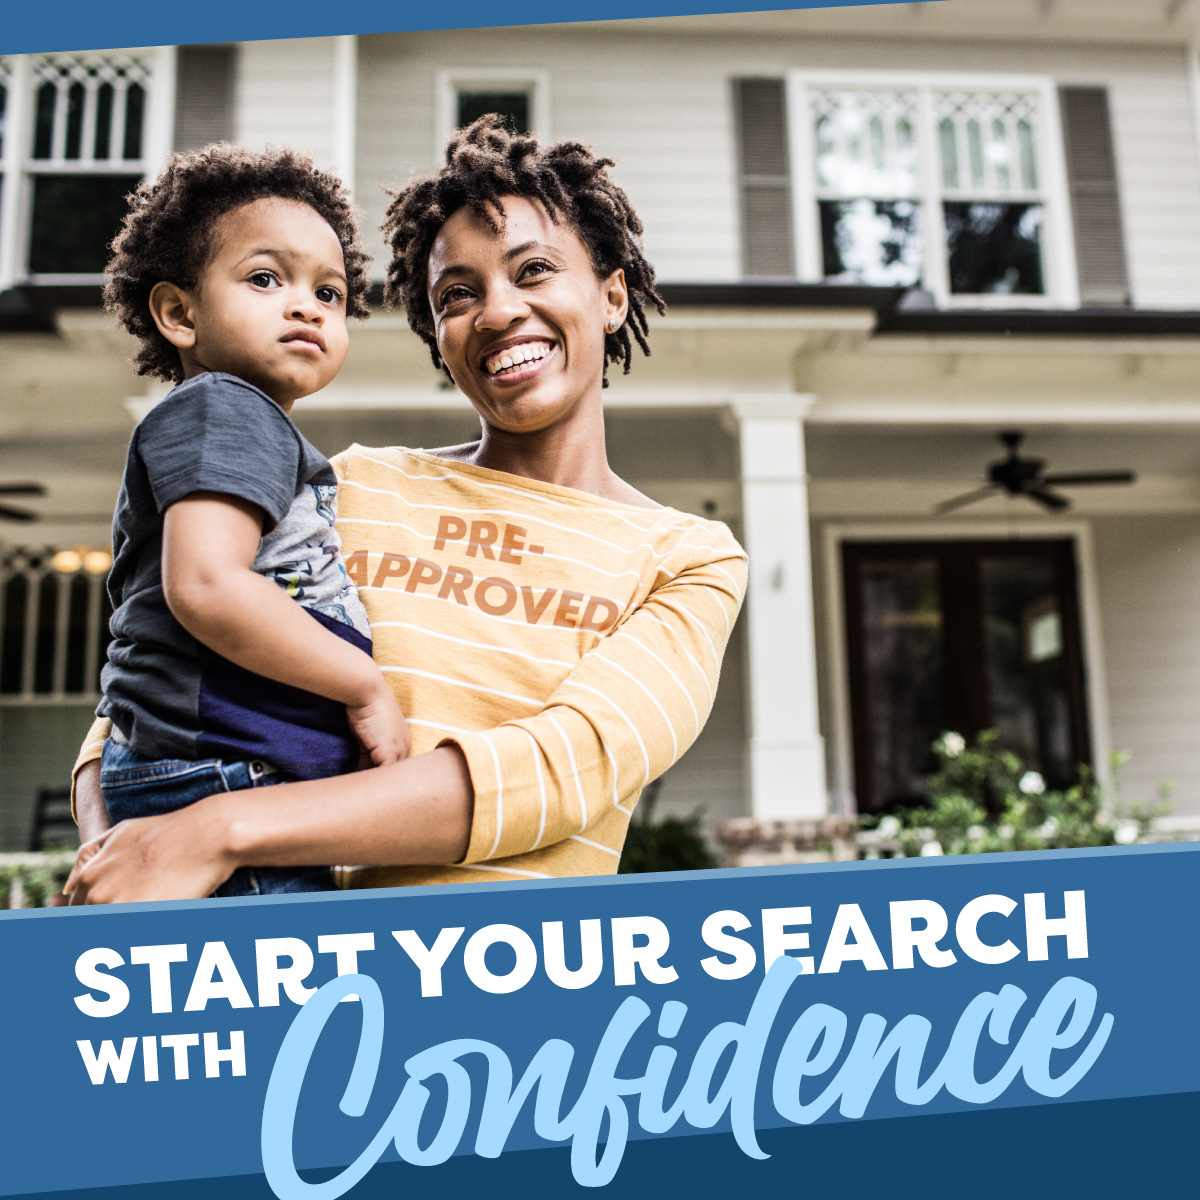 Many first-time homebuyers start house hunting before getting a mortgage pre-approval. This can lead to disappointment if they fall in love with a house only to find out they can't afford it. Call me today to get started!